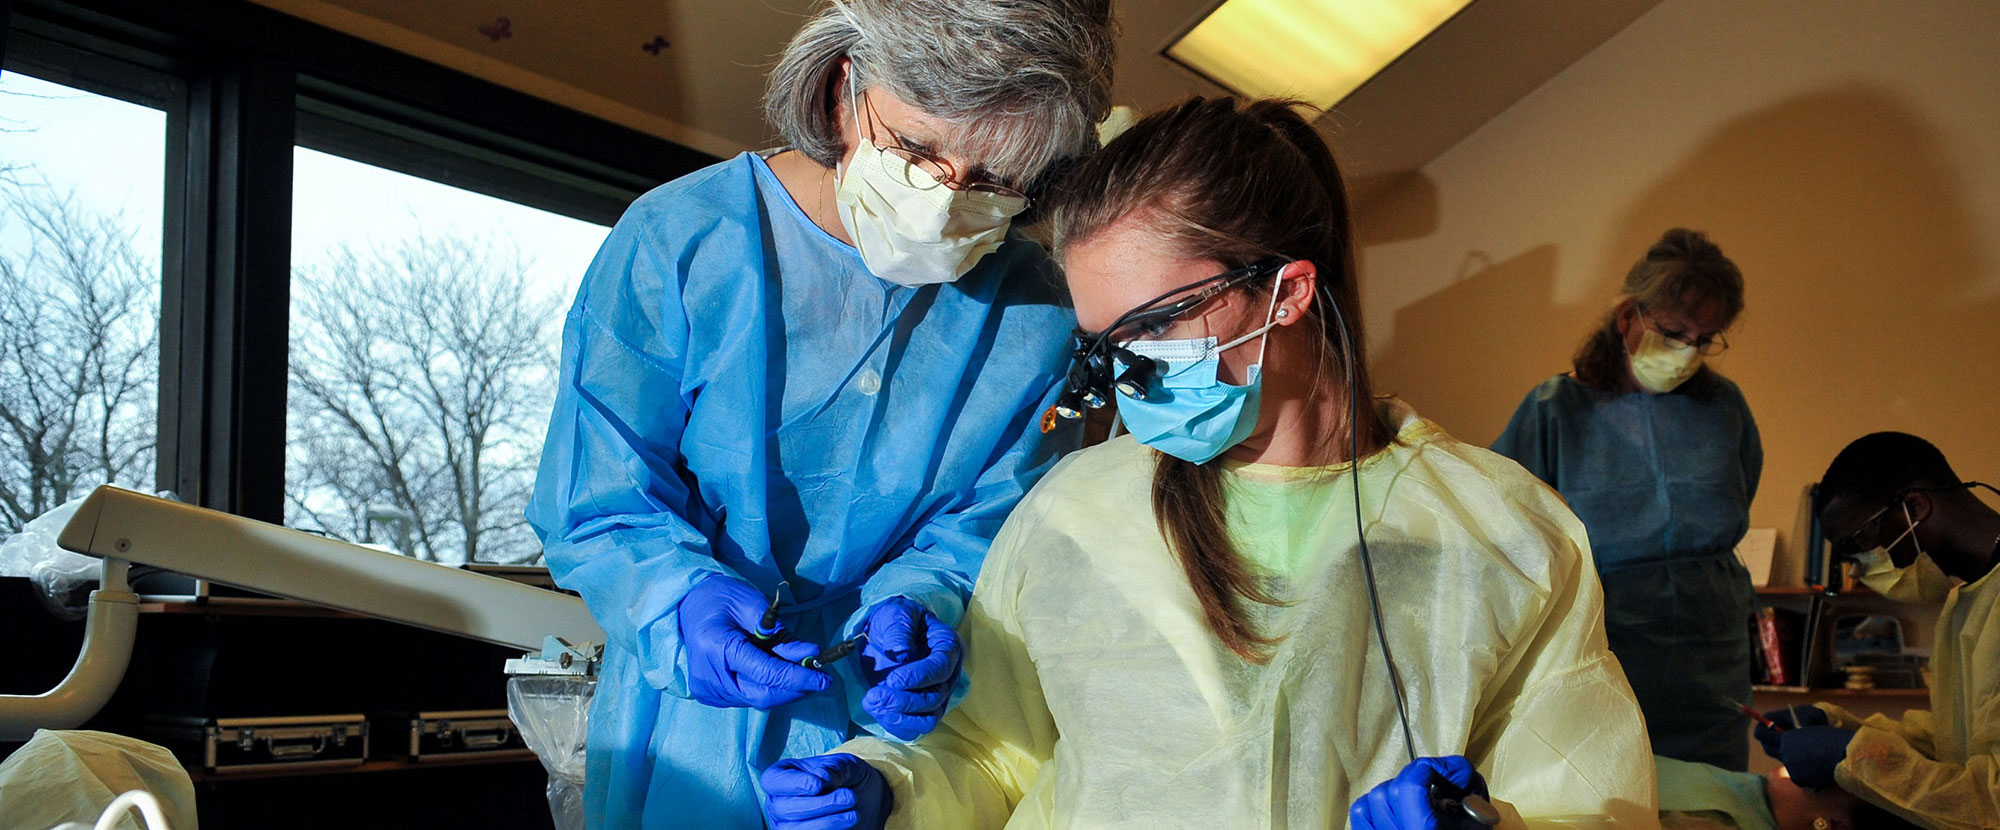 Dental teacher and Student in protective gear